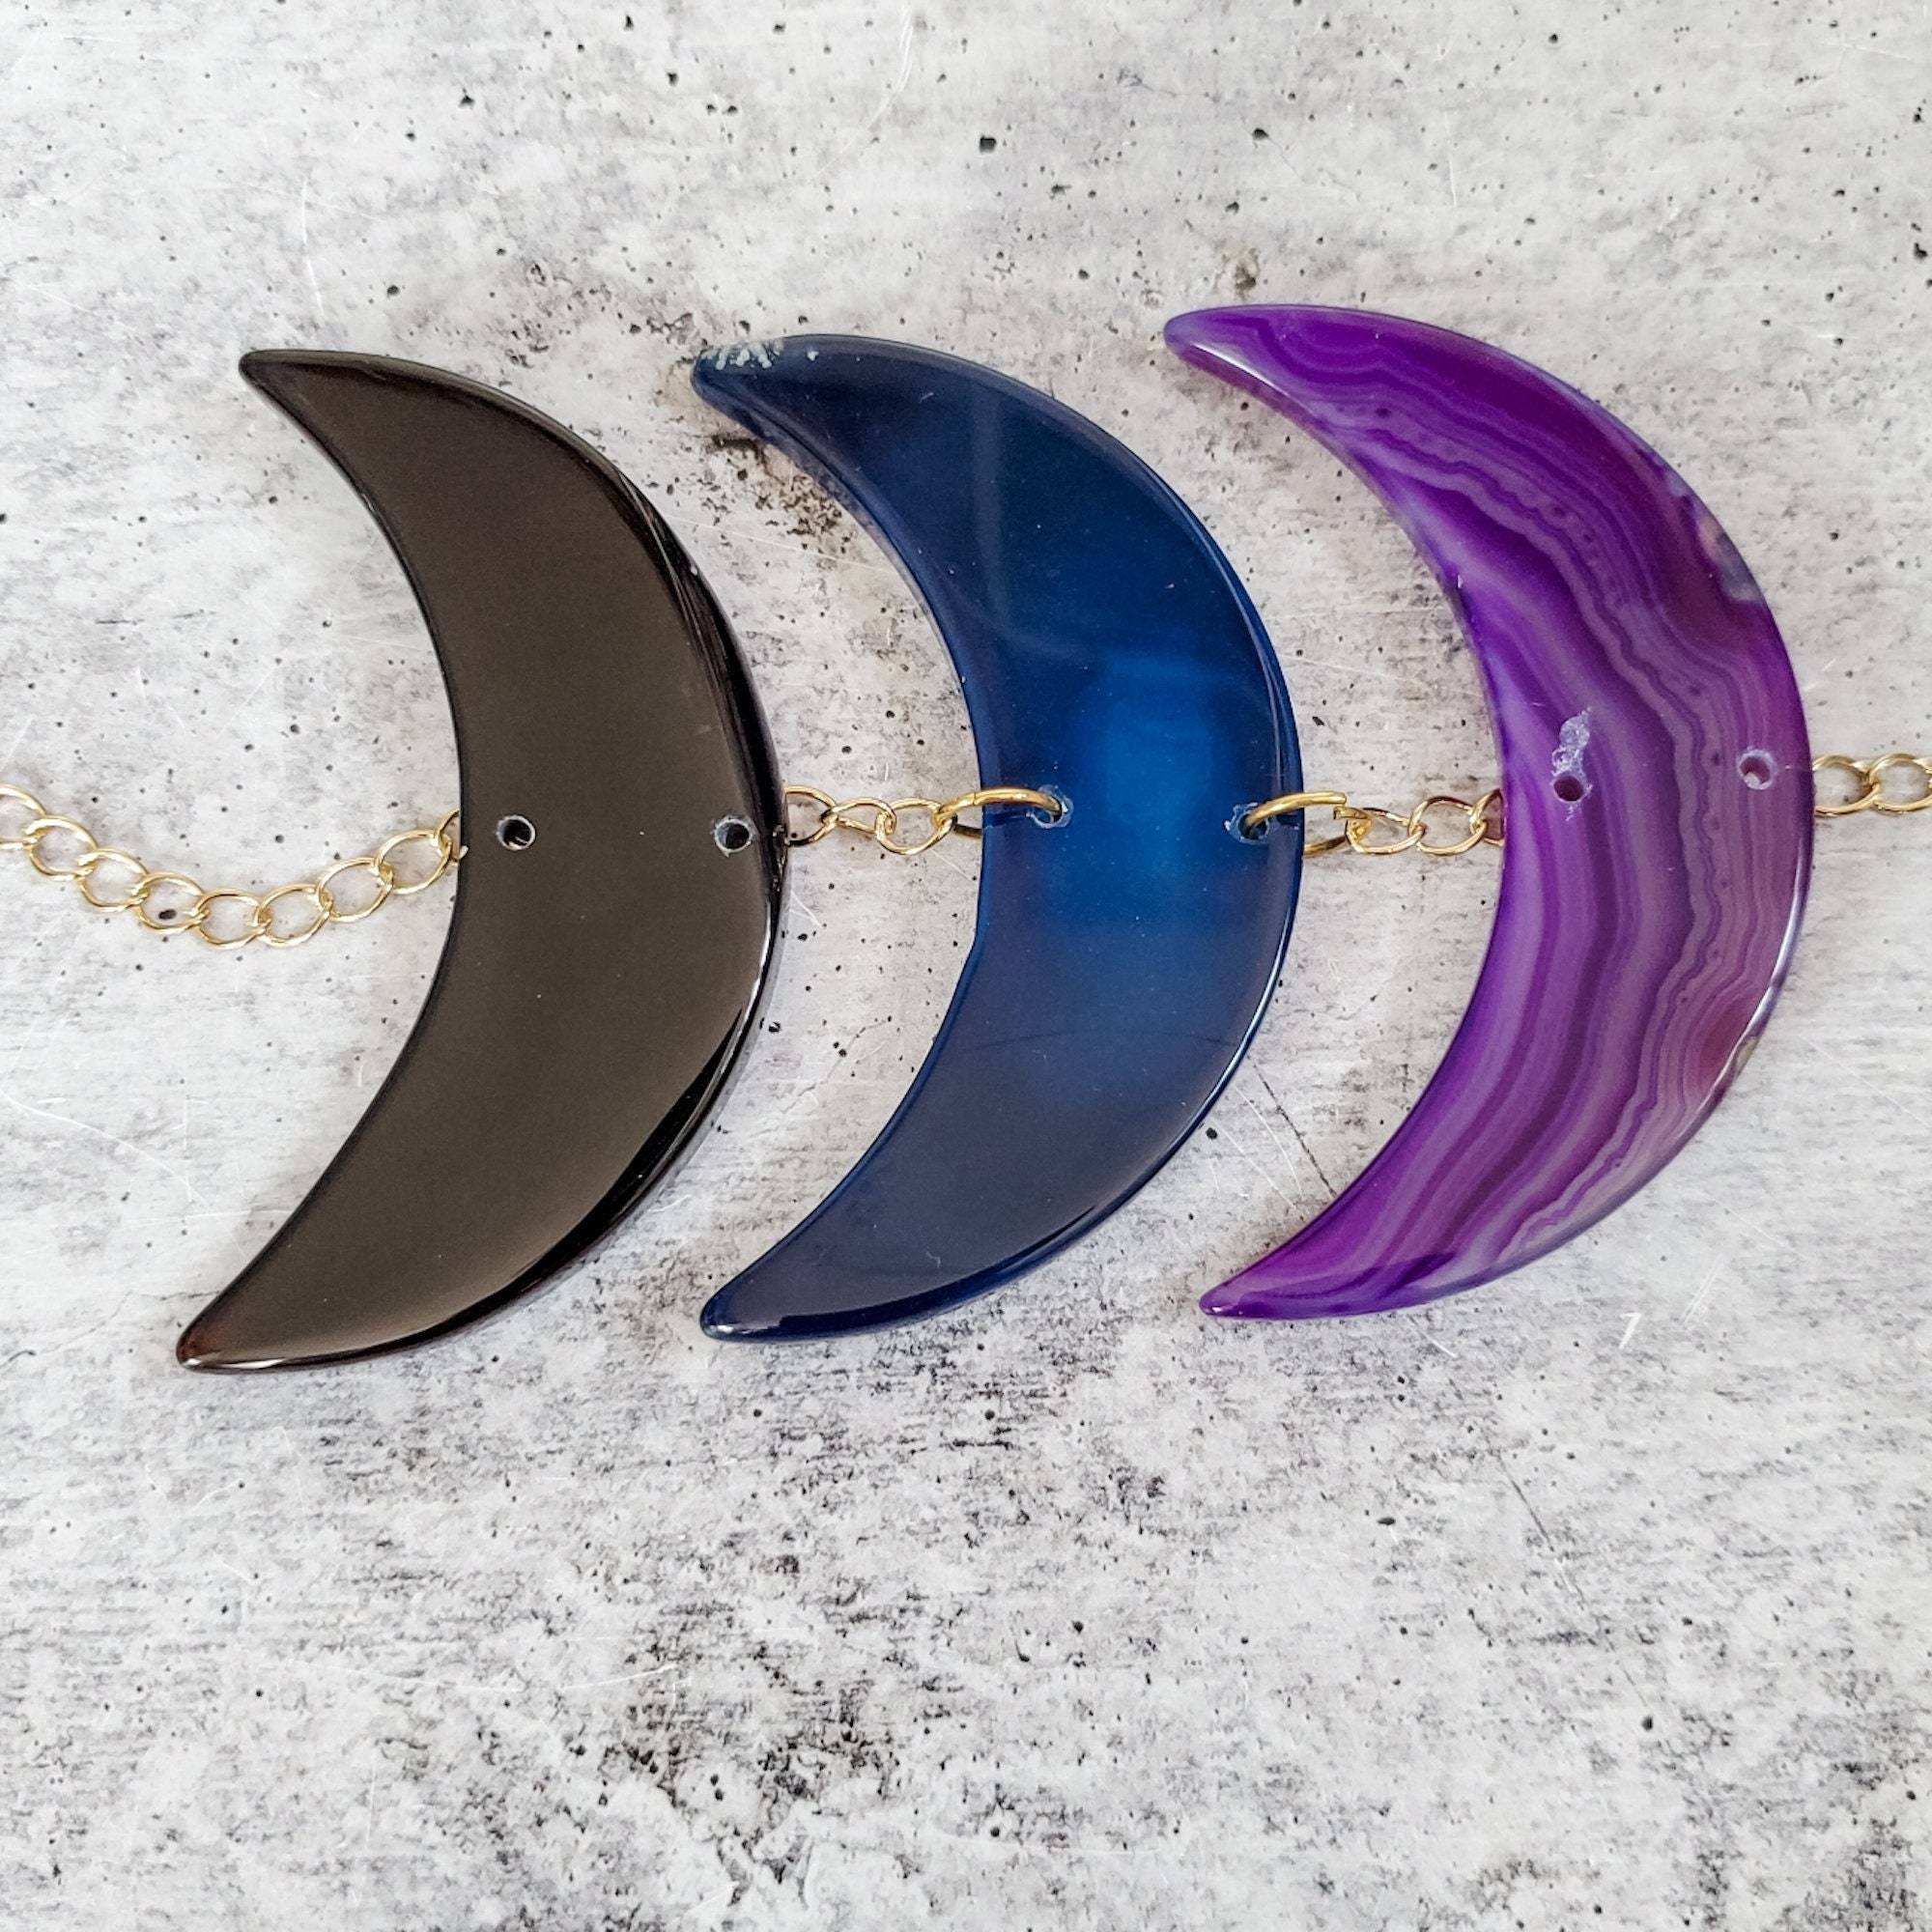 Moon Phases Agate Wall Hanging Decor Salt and Sparkle